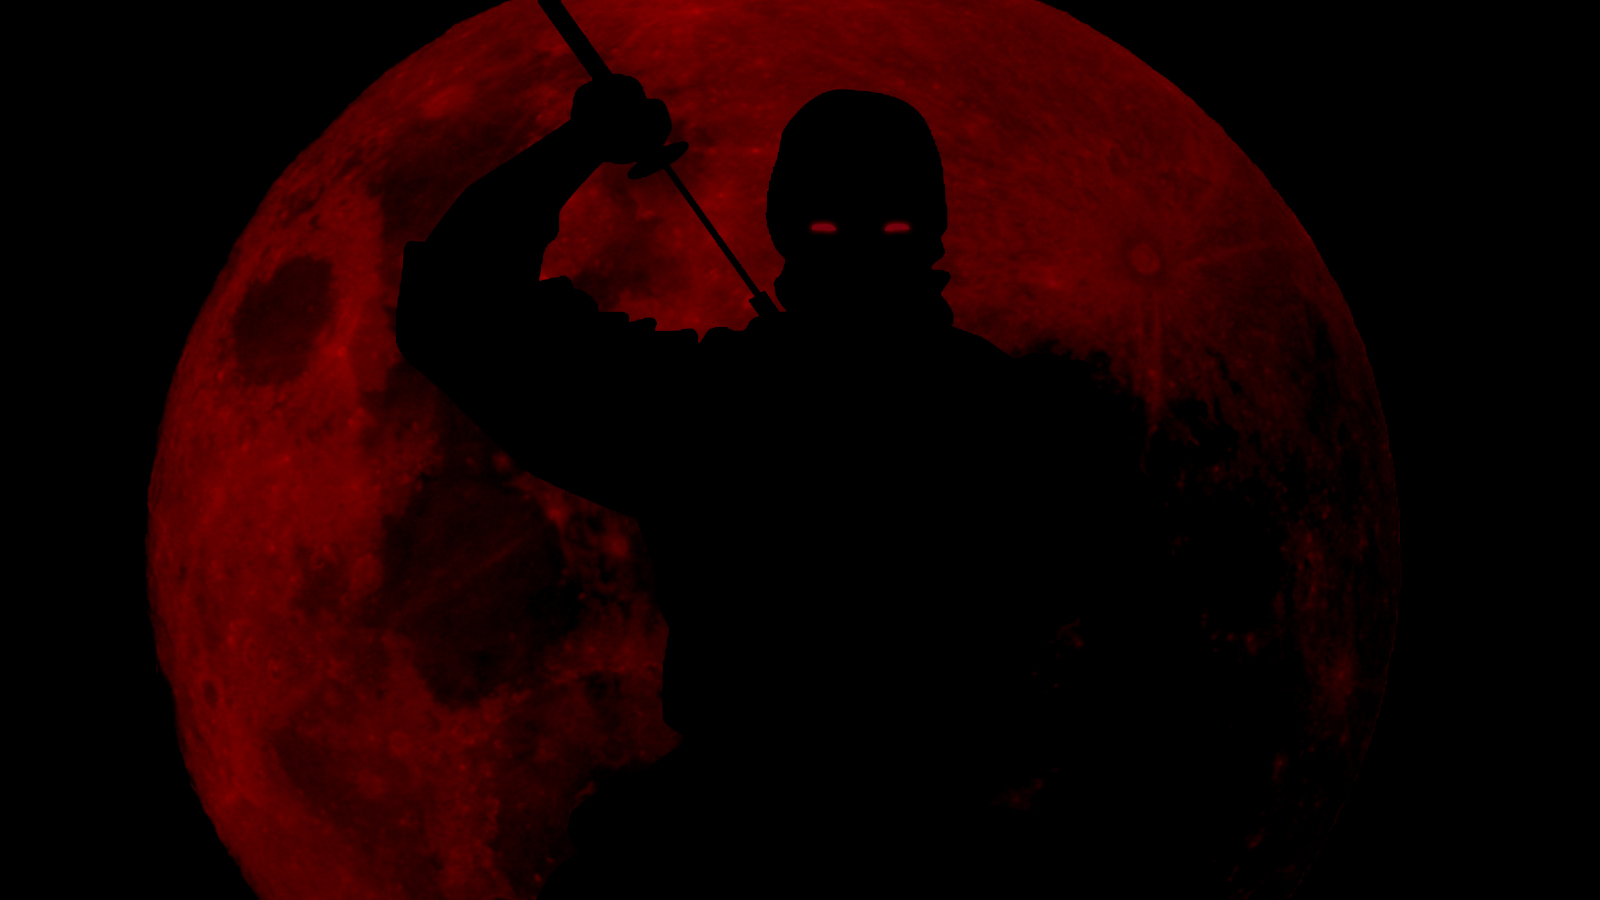 Free Download Ninja And Red Moon Wallpaper Pc 1600x900 For Your Desktop Mobile Tablet Explore 71 Red Moon Wallpaper Blood Red Wallpaper Blood Moon Wallpaper Blood Moon Wallpaper Hd